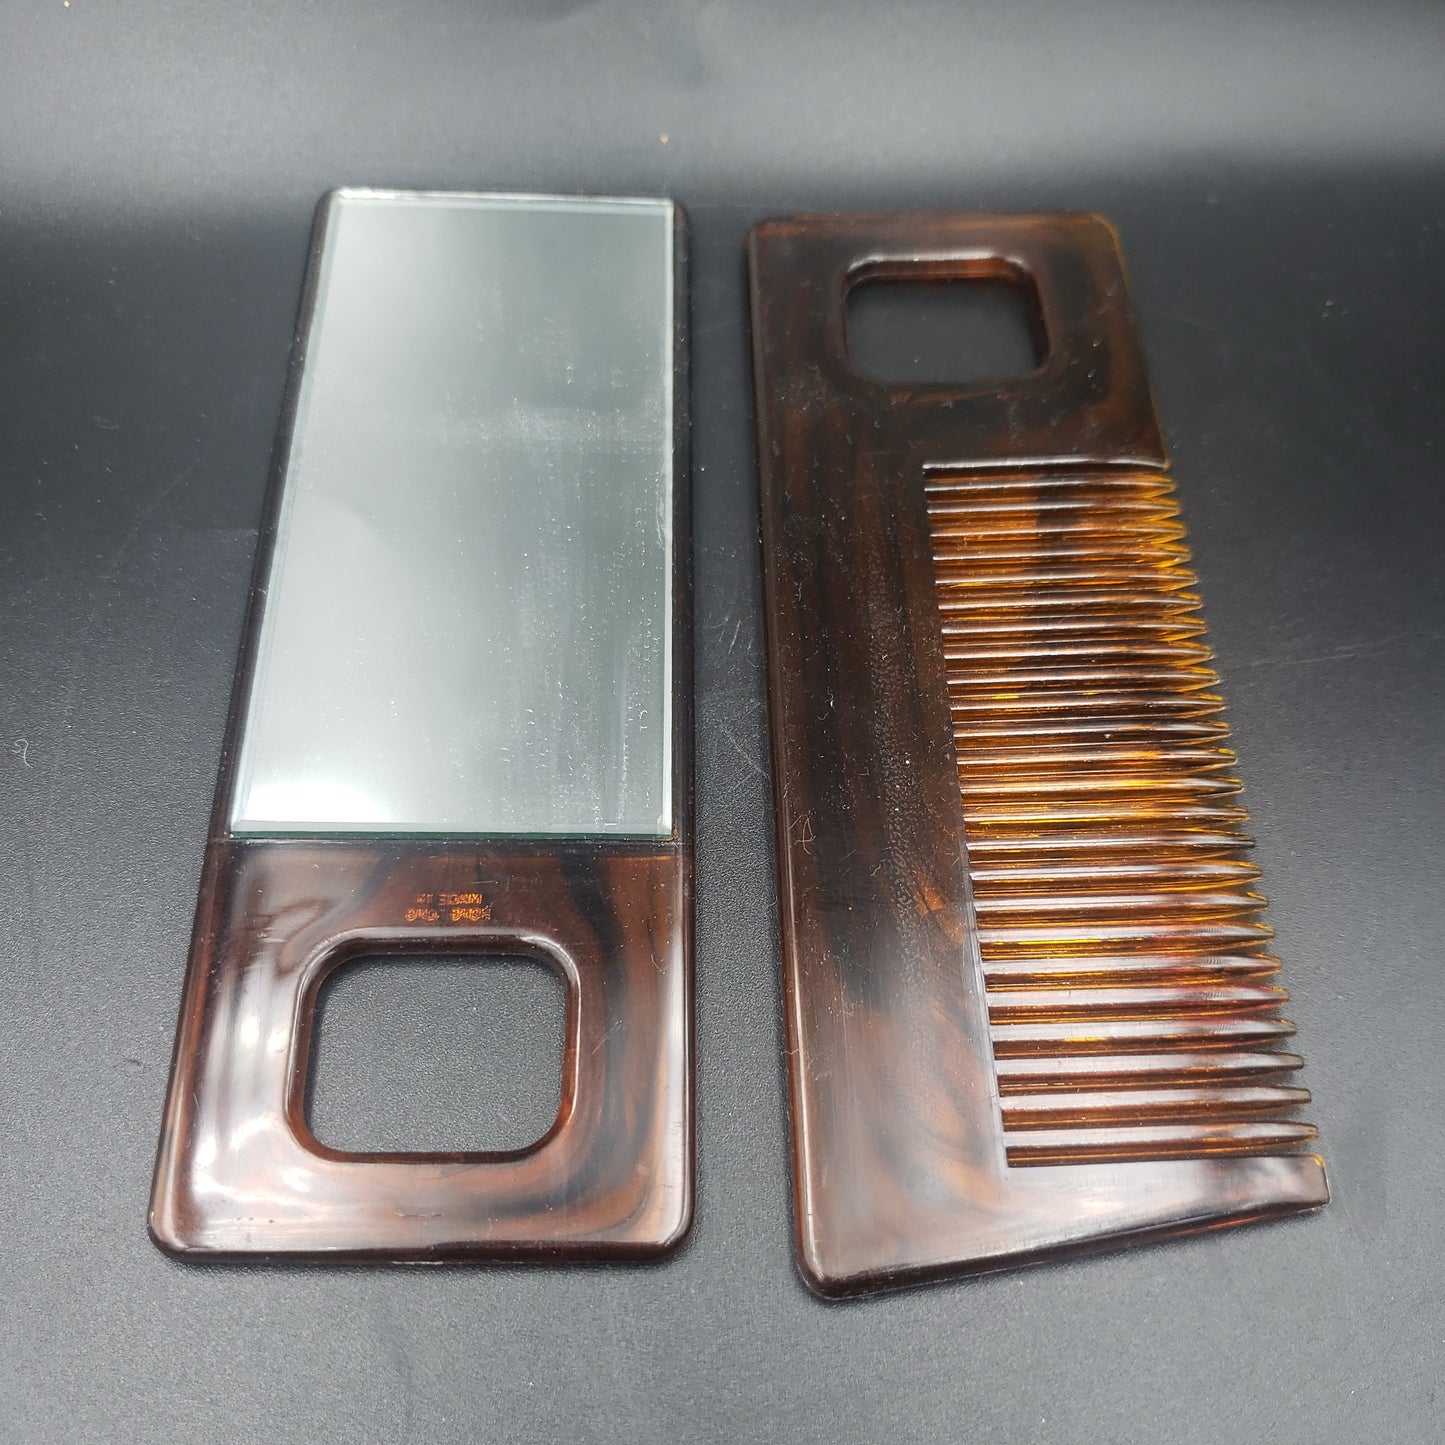 Travel mirror and comb set